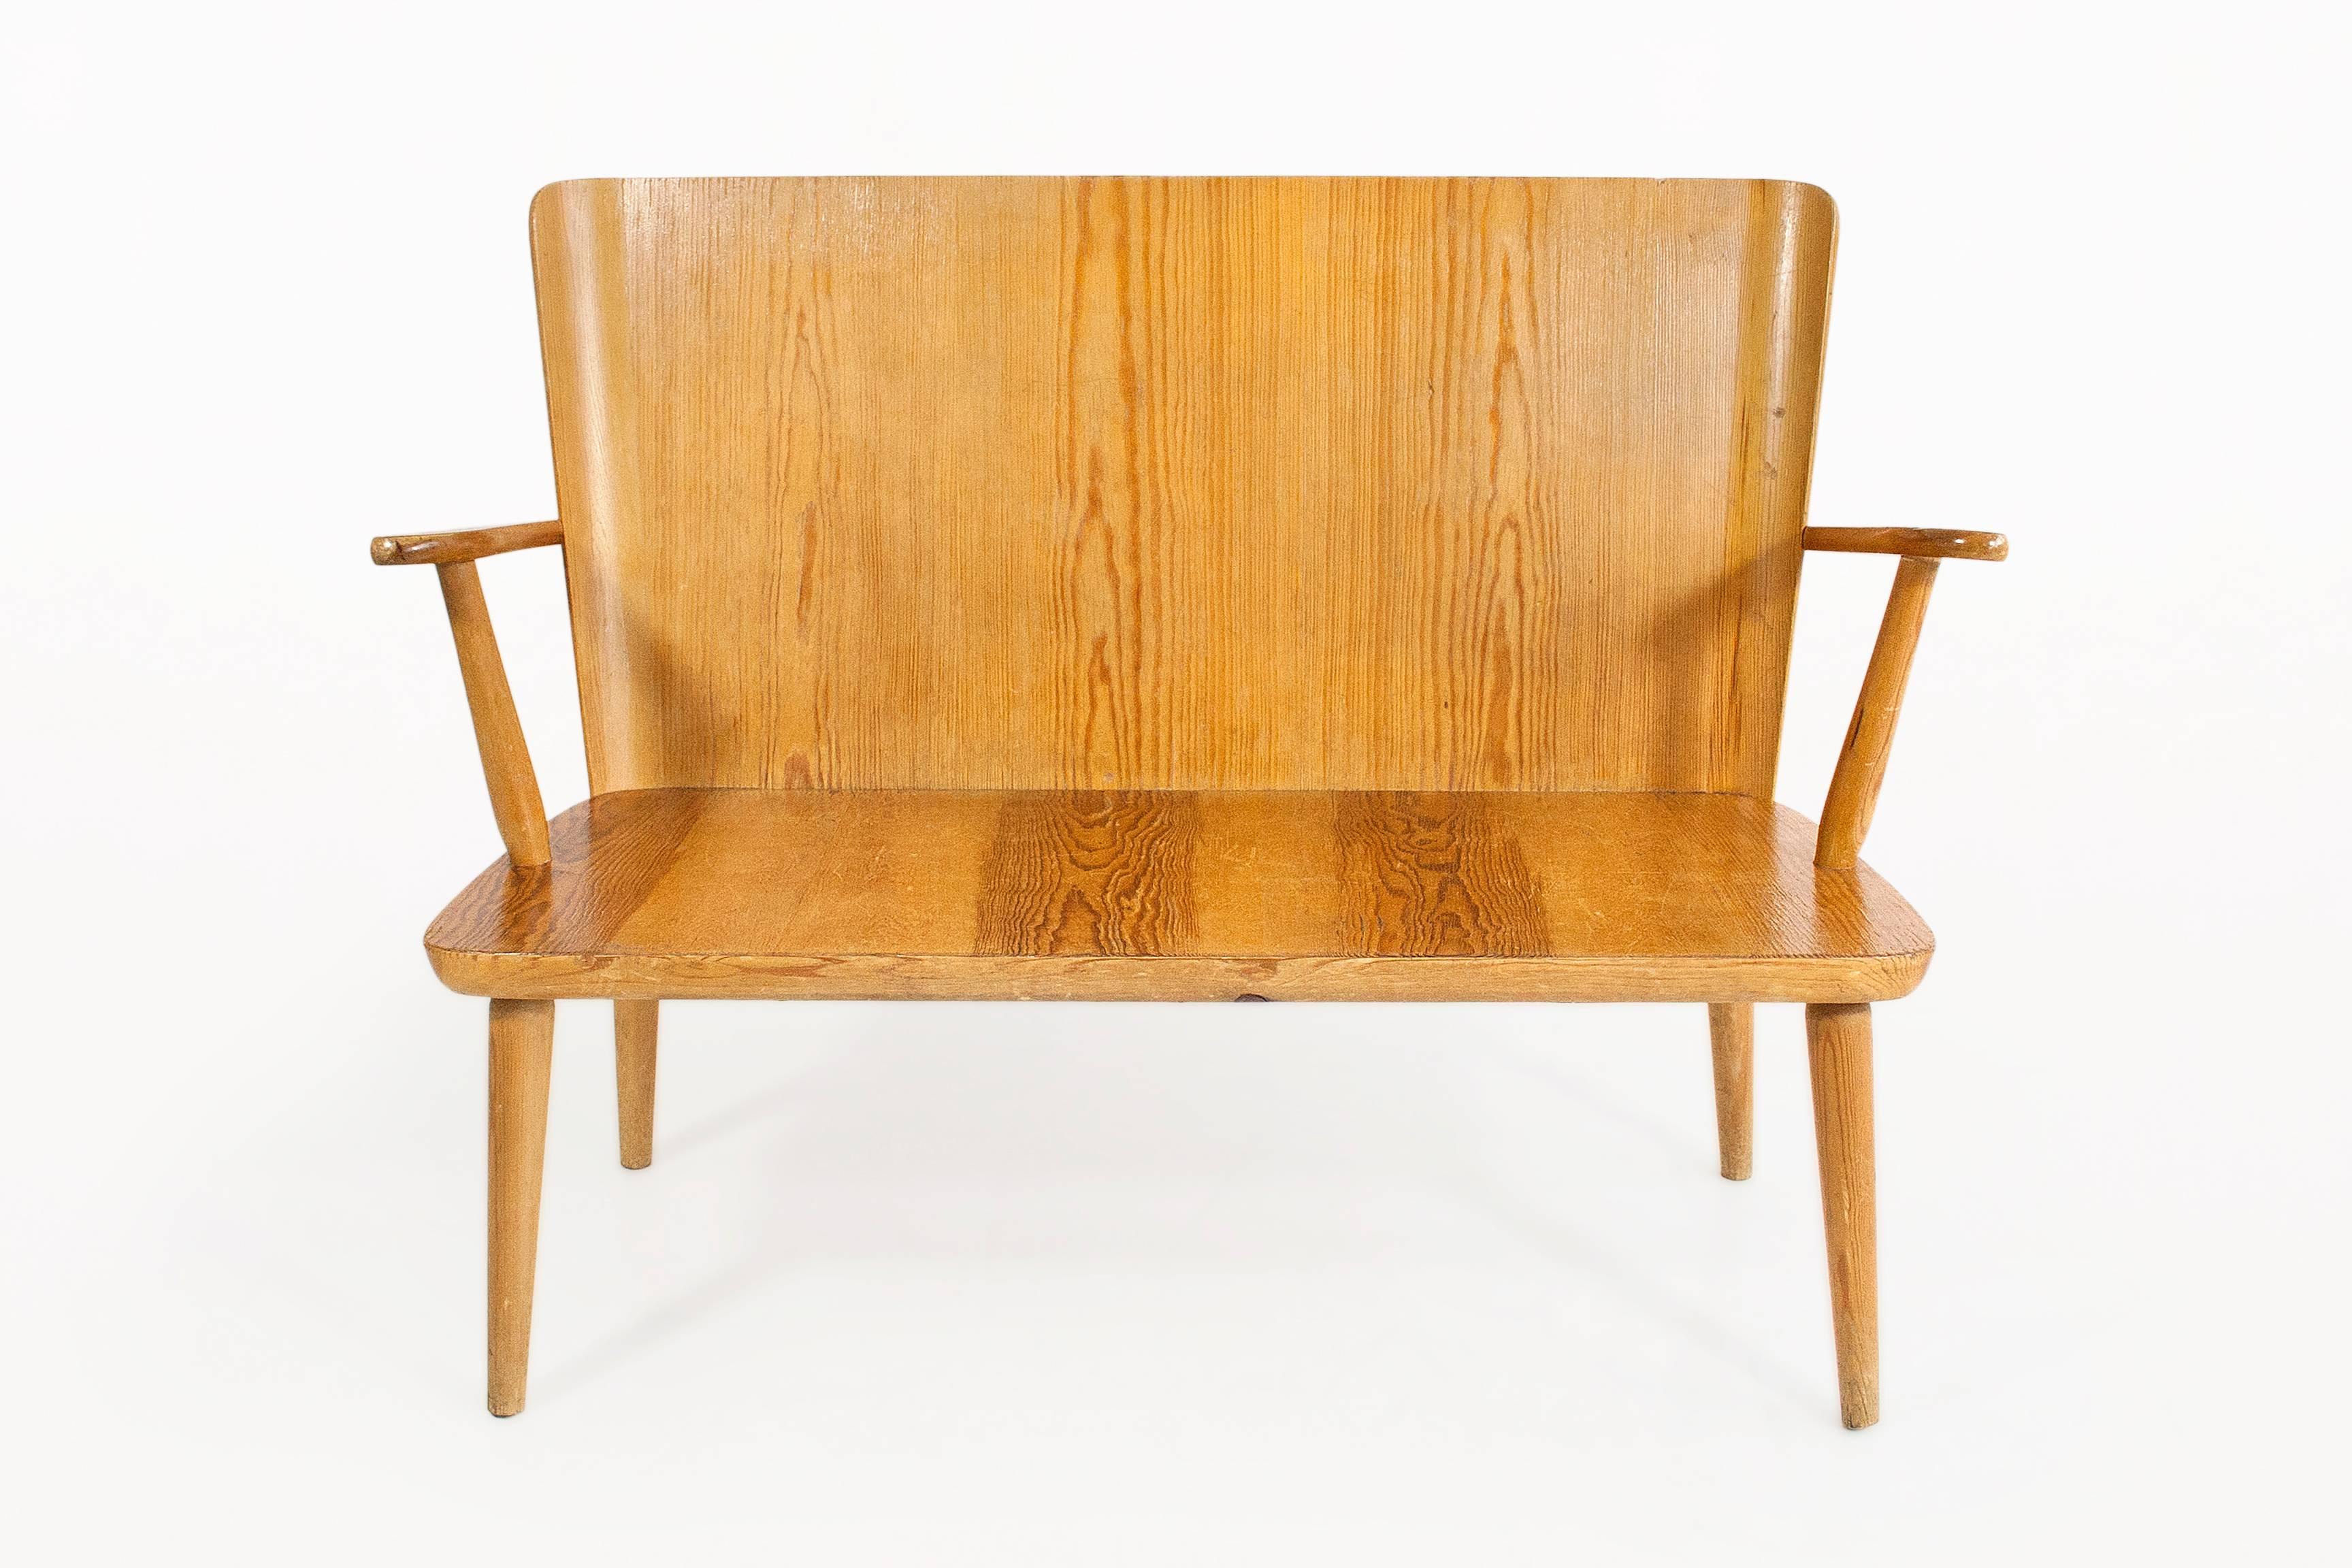 Large Elm Bench
Plank seat with back and four legs doweled into place.
Circa 1950, Sweden
Very Good vintage Condition